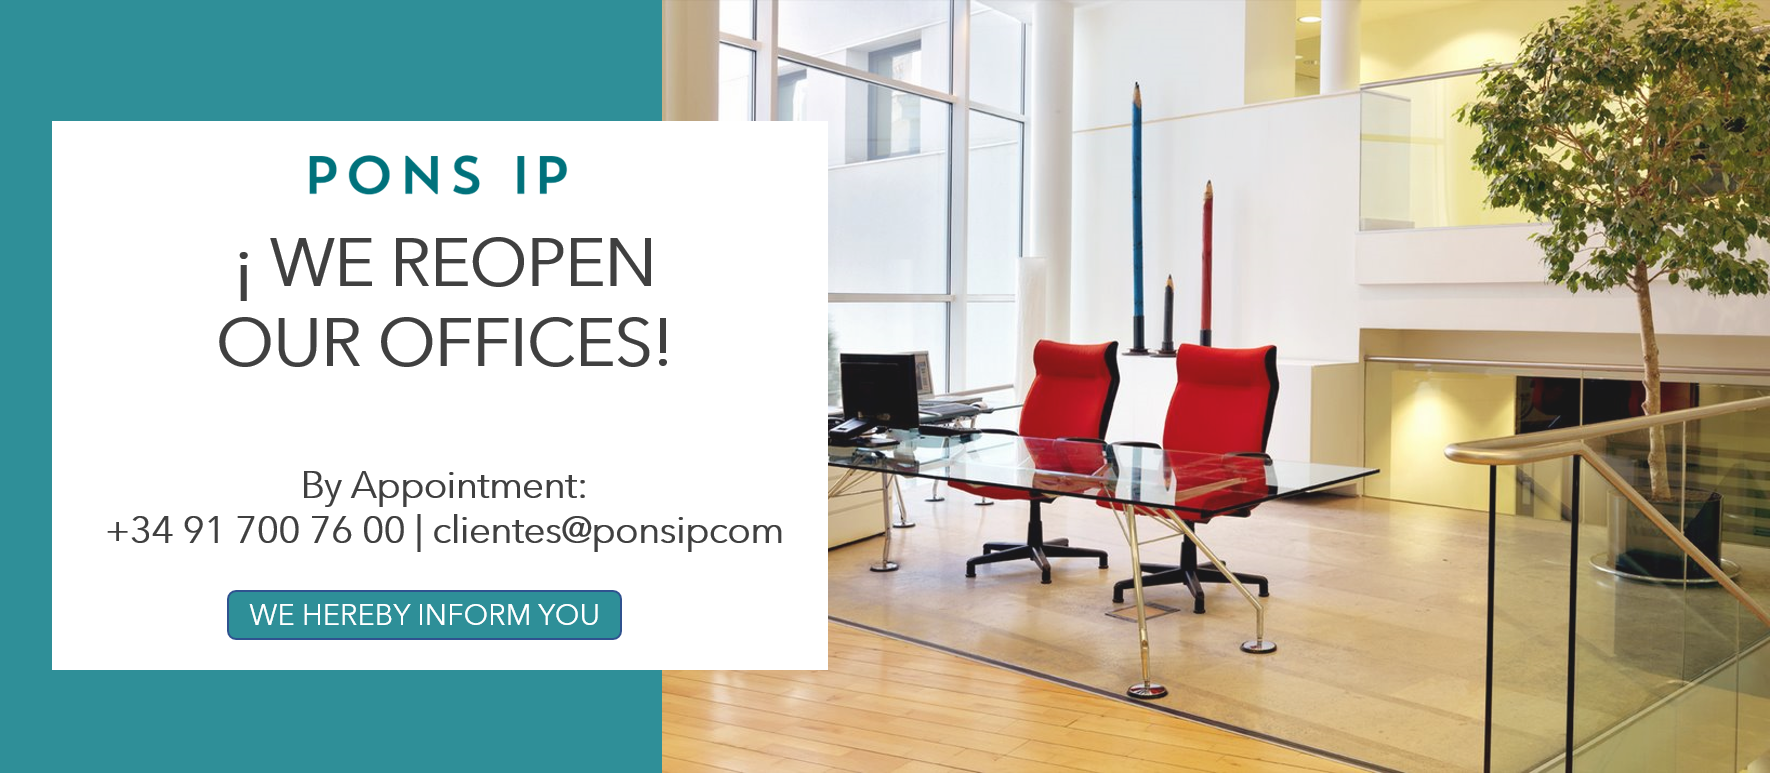 PONS IP REOPENING OUR OFFICES TO THE PUBLIC